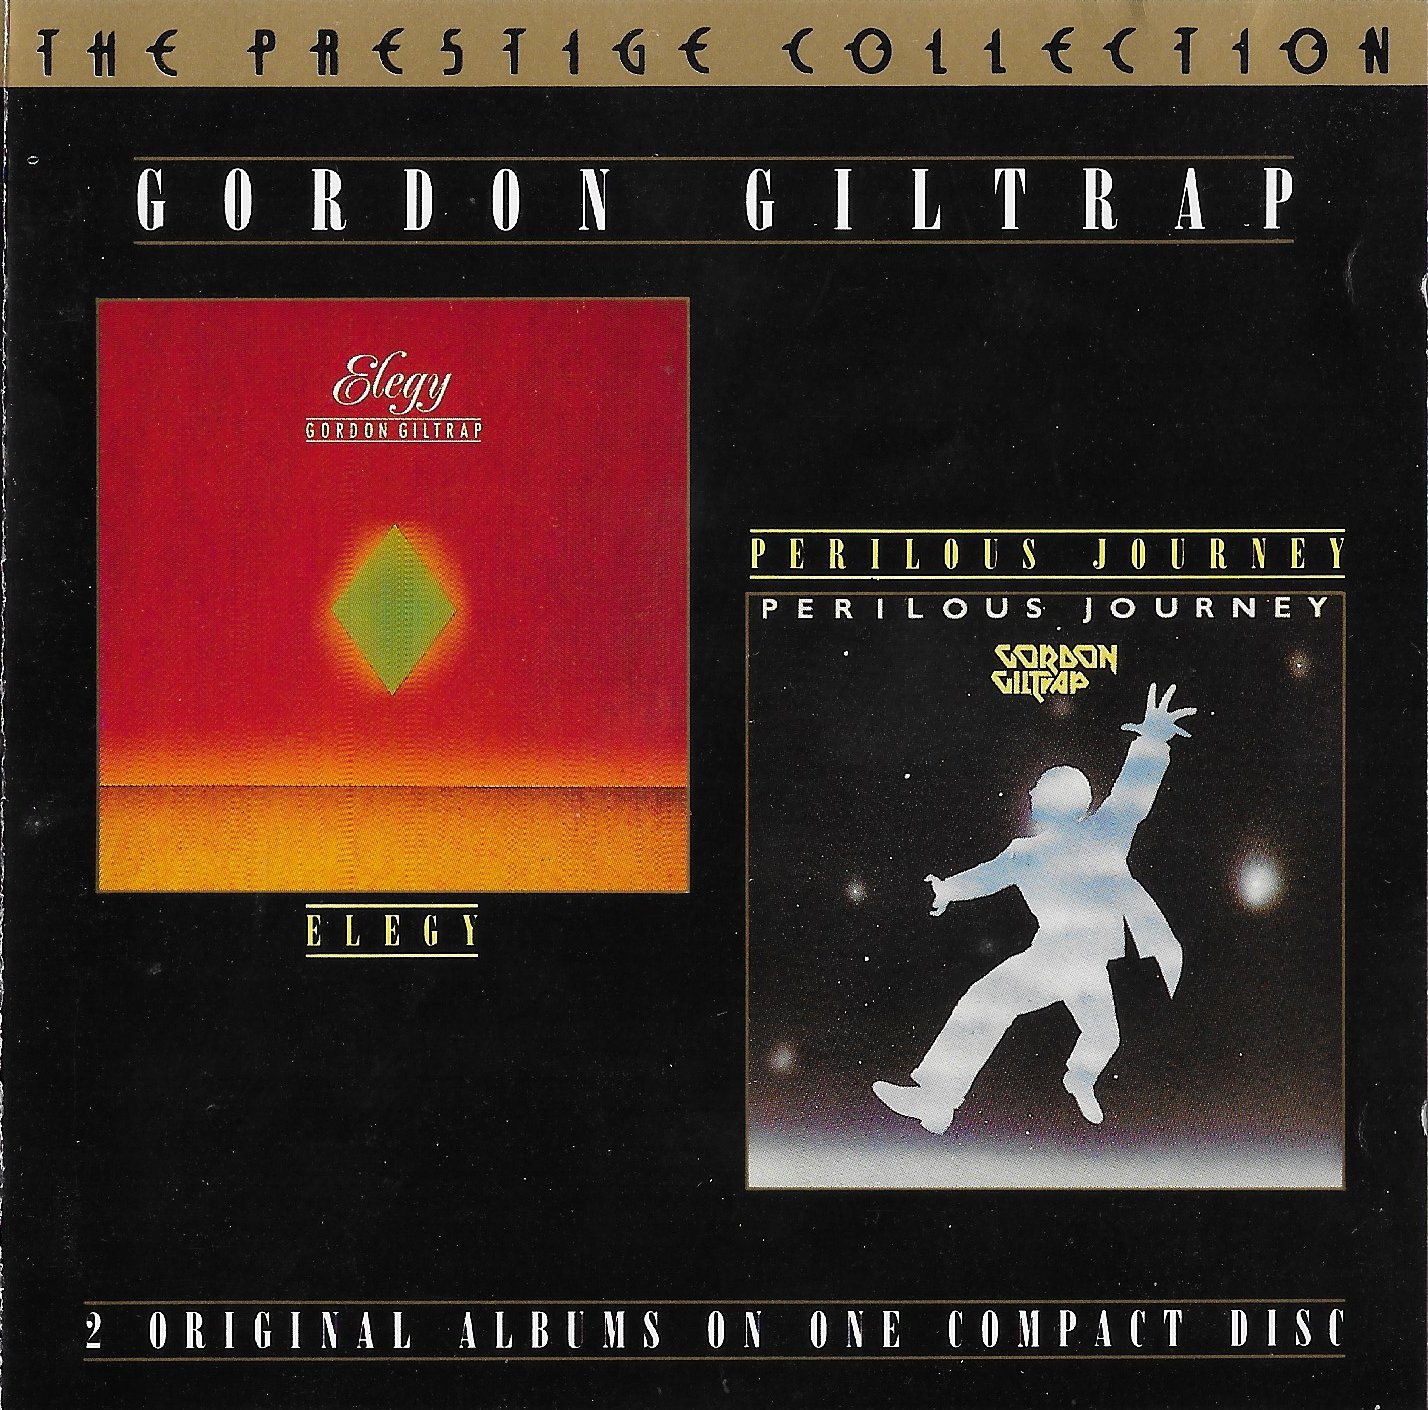 Picture of CDPM 850 Elegy / Perilous Journey by artist Gordon Giltrap from the BBC cds - Records and Tapes library